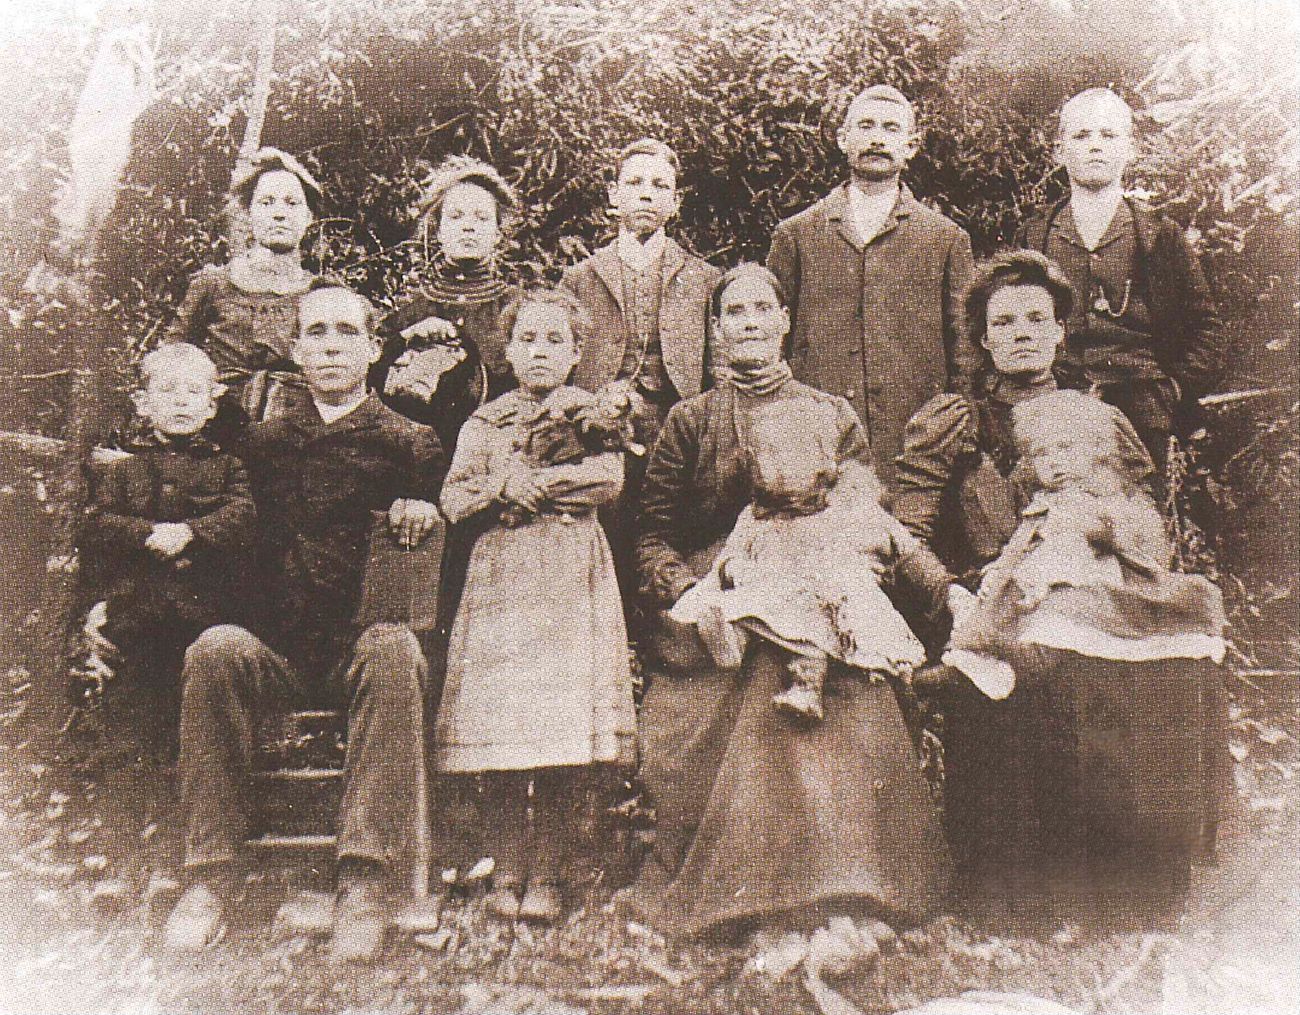 Will Bryant (seated left) and his family about 1905